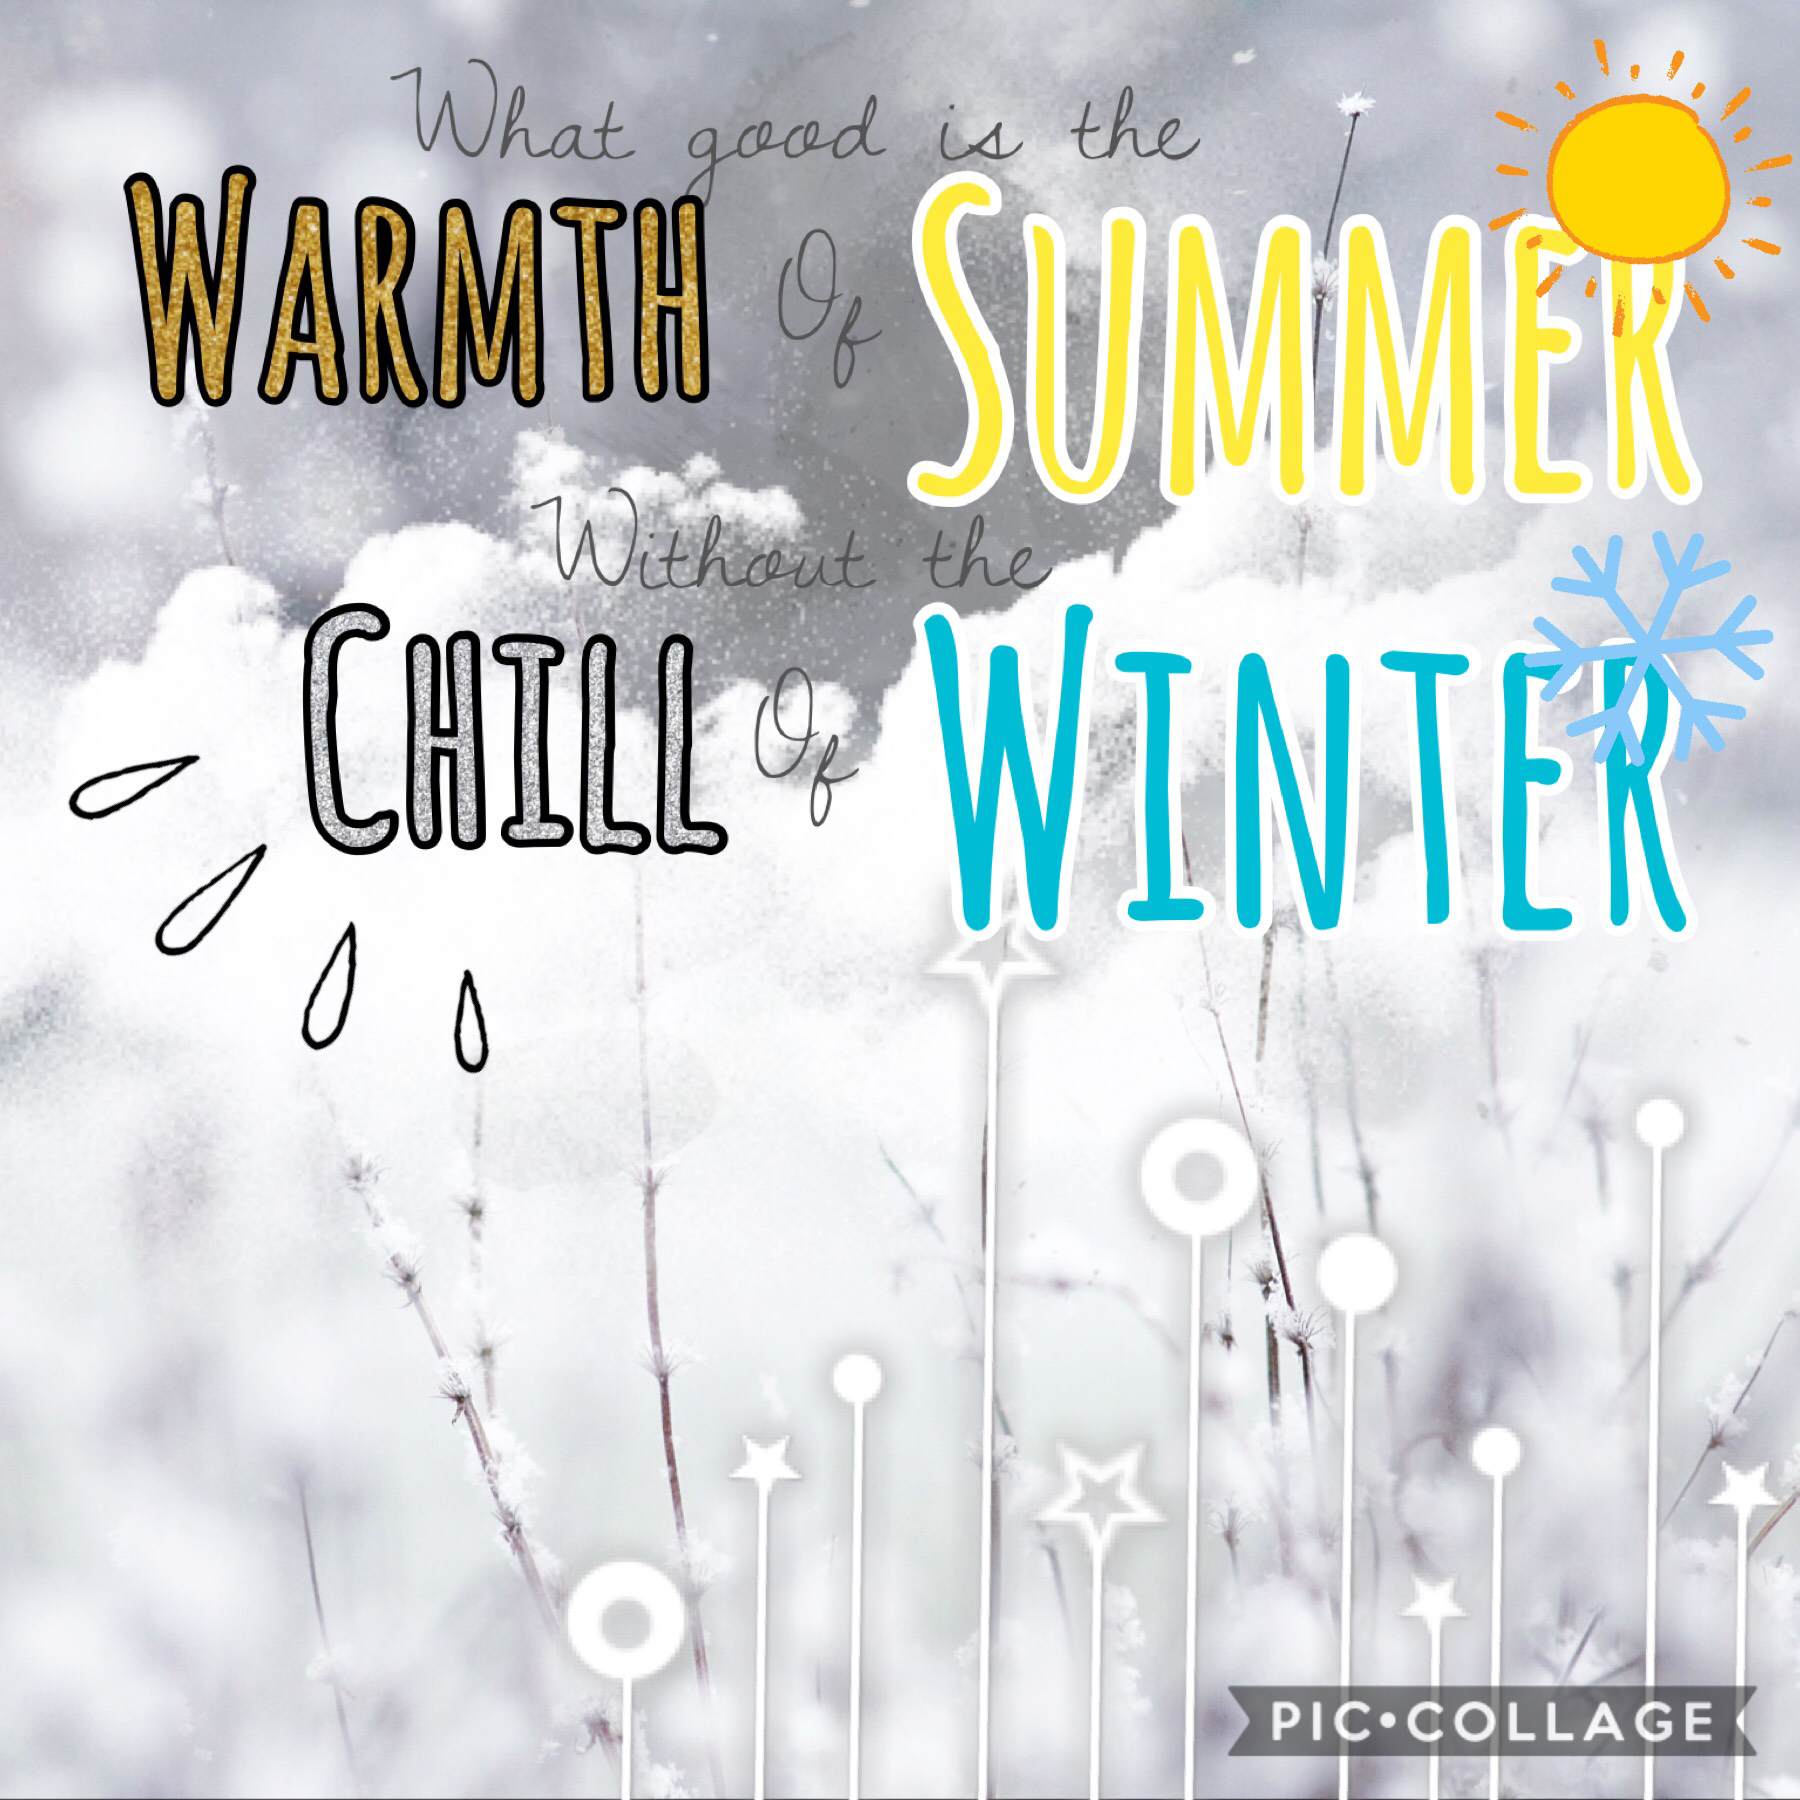 I love both summer and winter.